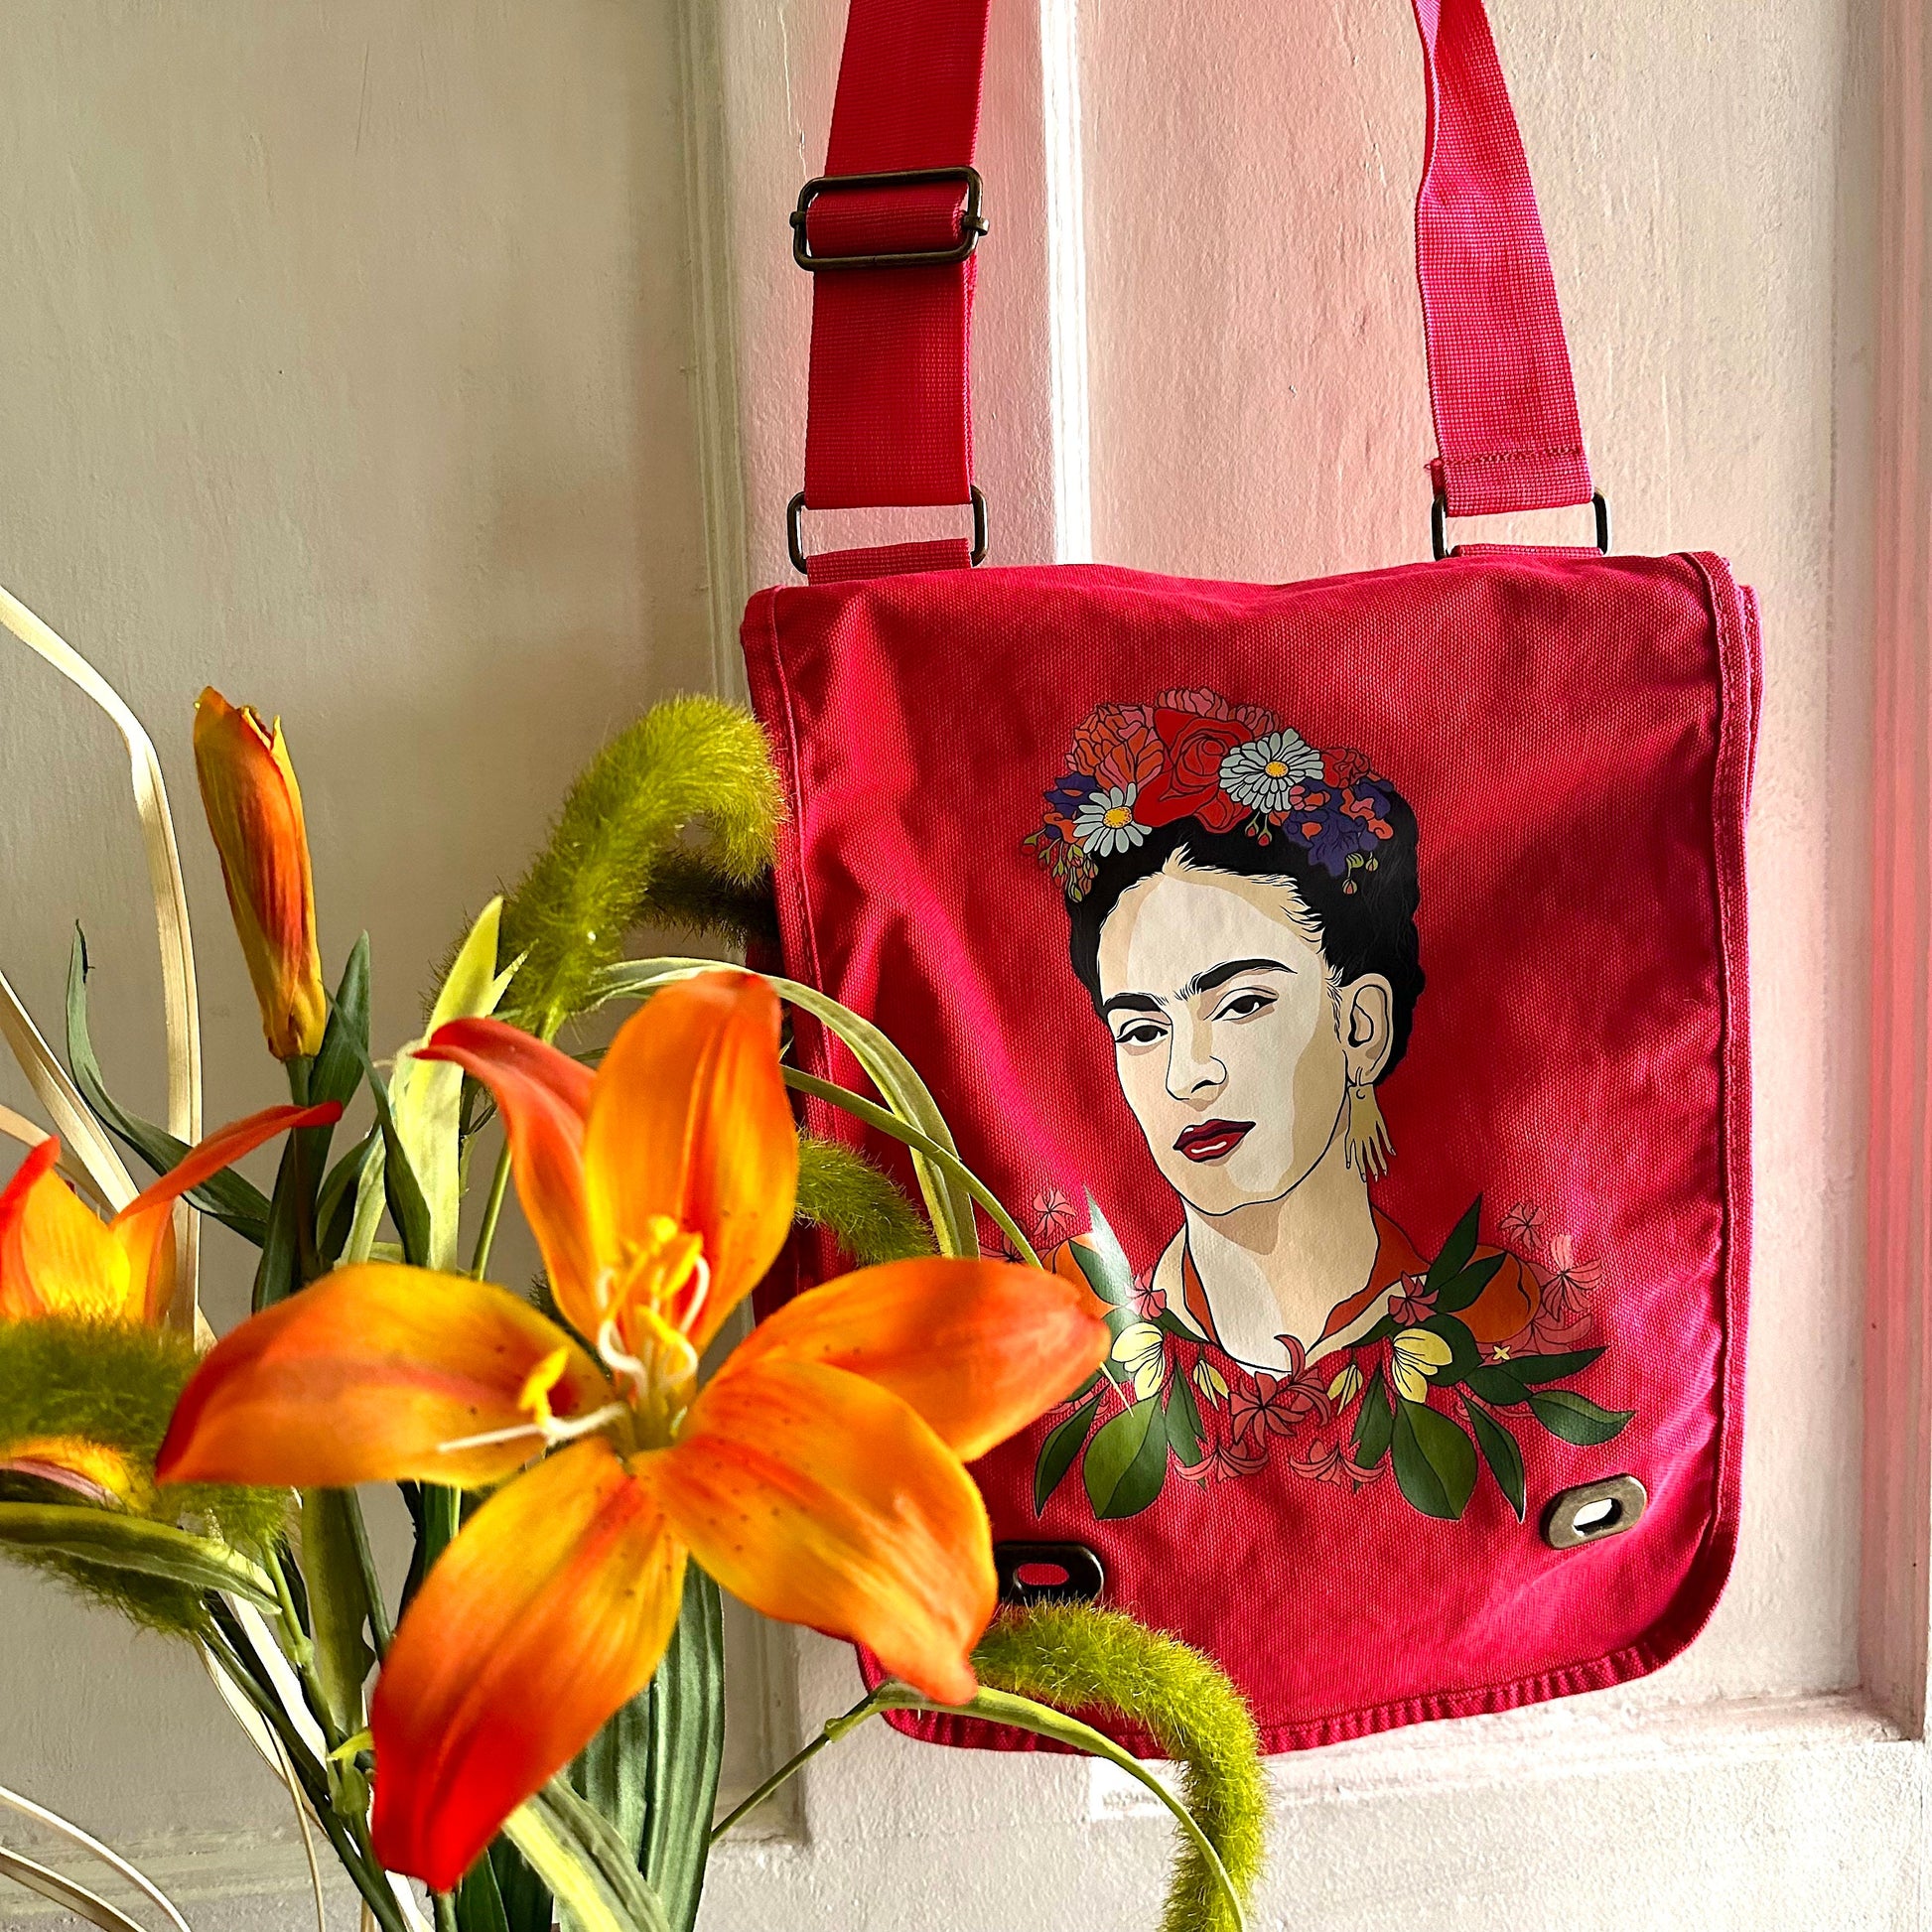 Glamorous Frida Inspired Bag Fuchsia Pink-Red Color Crossbody Shoulder Canvas Bag for Girls and Women Fridalovers Fashion Mother's Day Gift